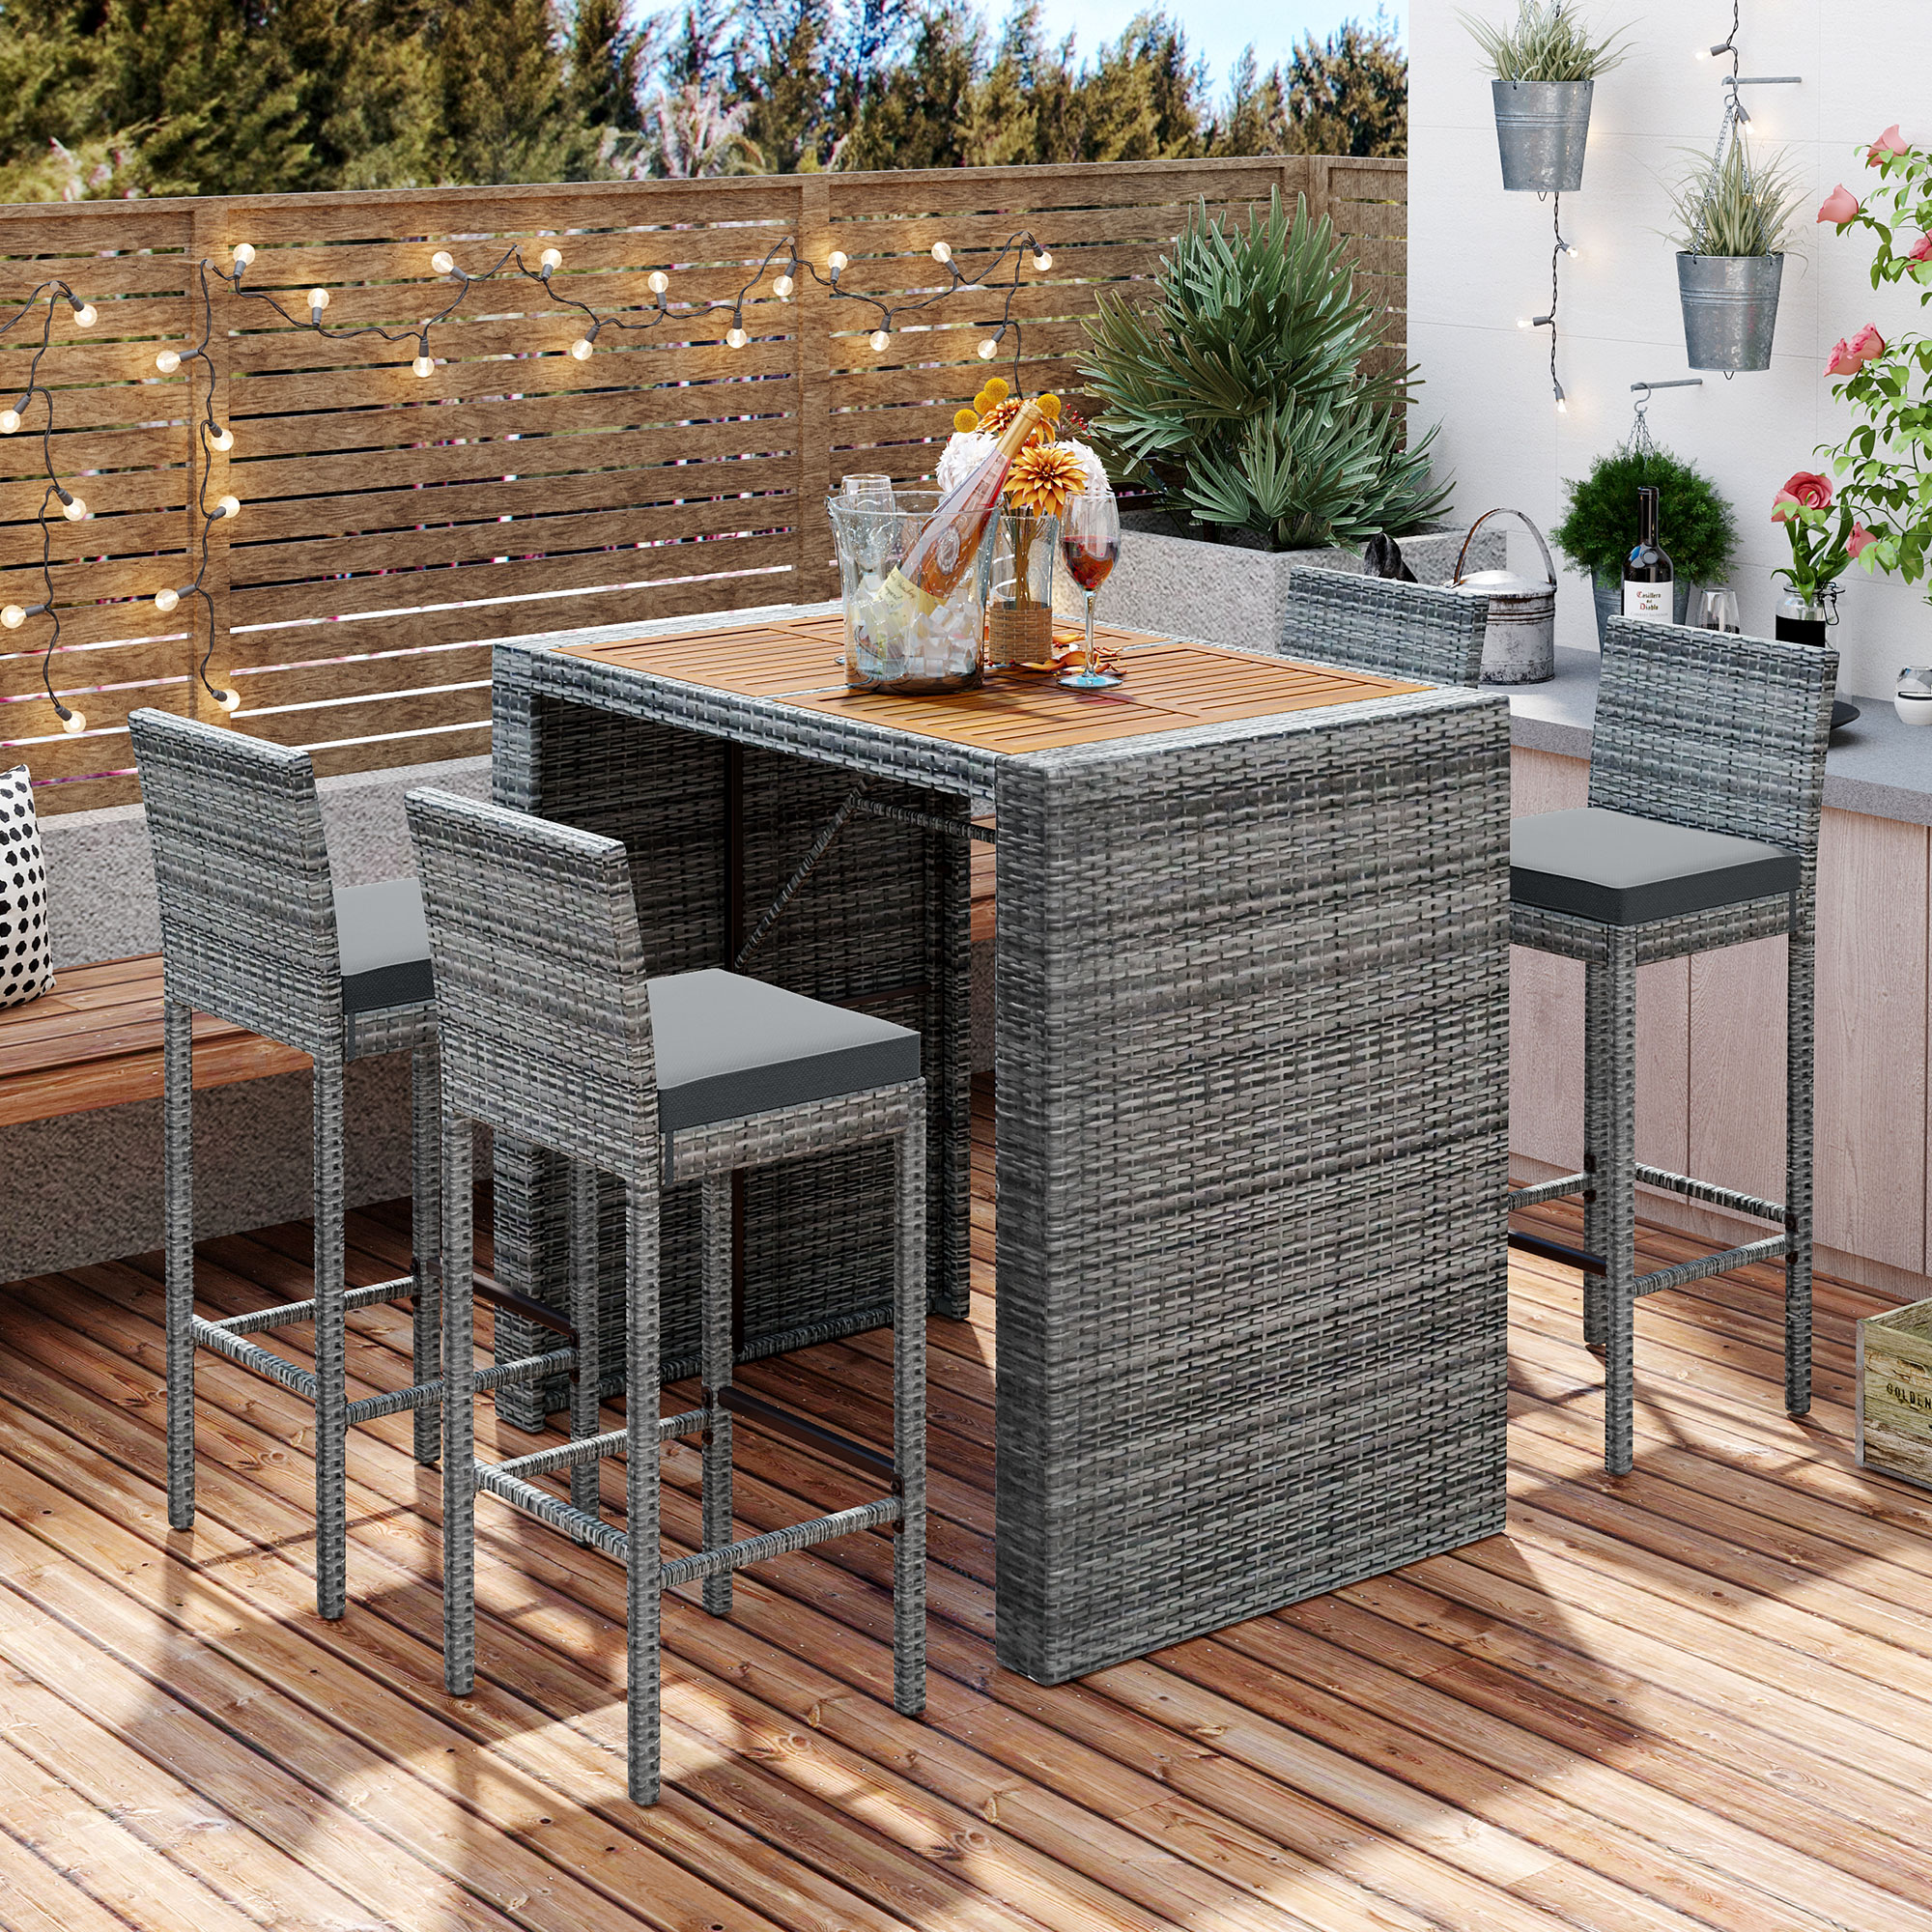 Seizeen 5 Pcs Outdoor Bar Set, Patio Wicker Furniture Set with Storage Table, Wood Bar table & Cushioned Chairs with Backrest for Bistro Backyard Porch Garden Poolside, Gray - image 2 of 11